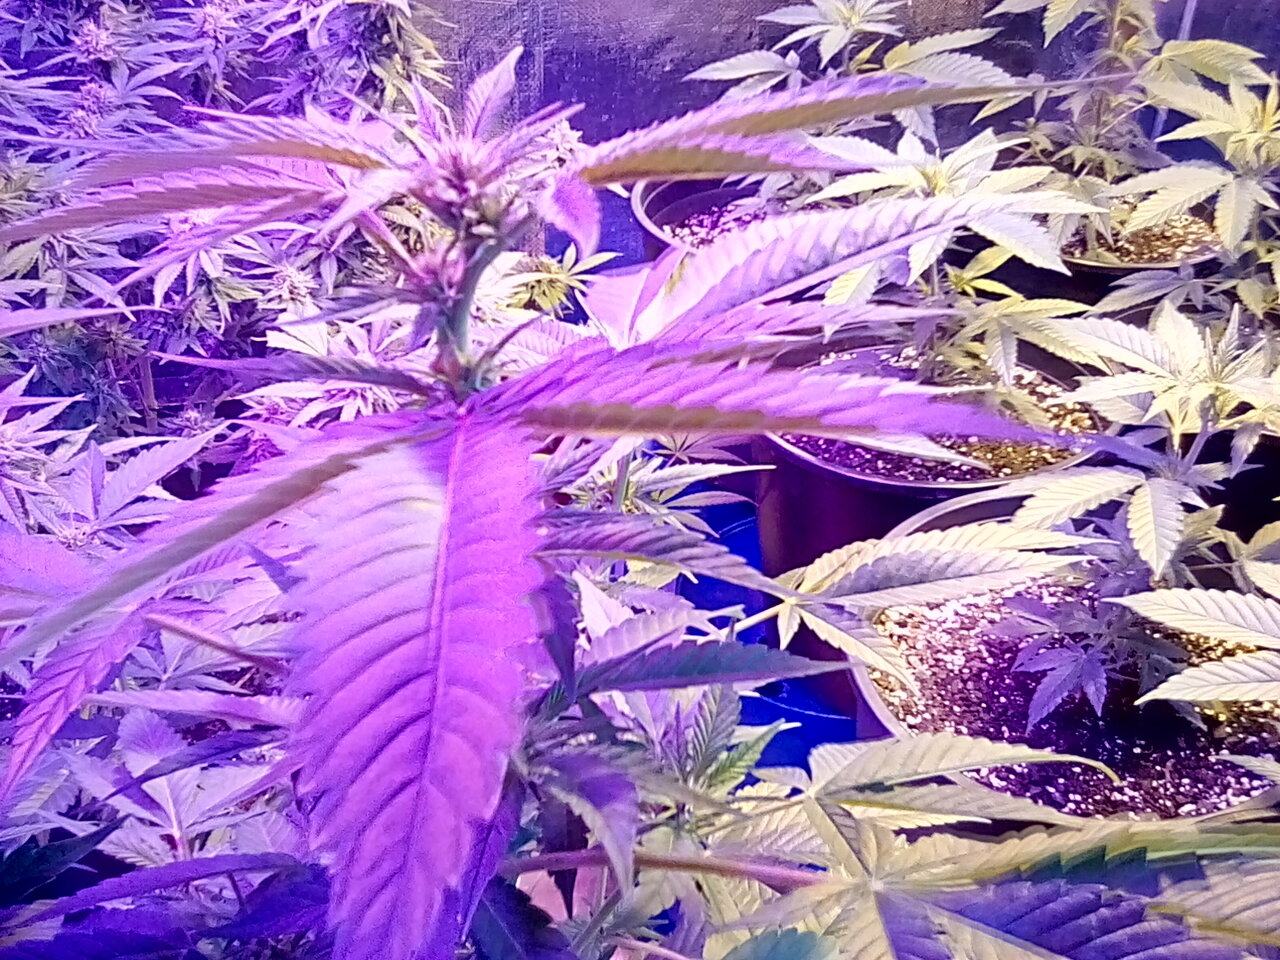 Day 13 of the flip